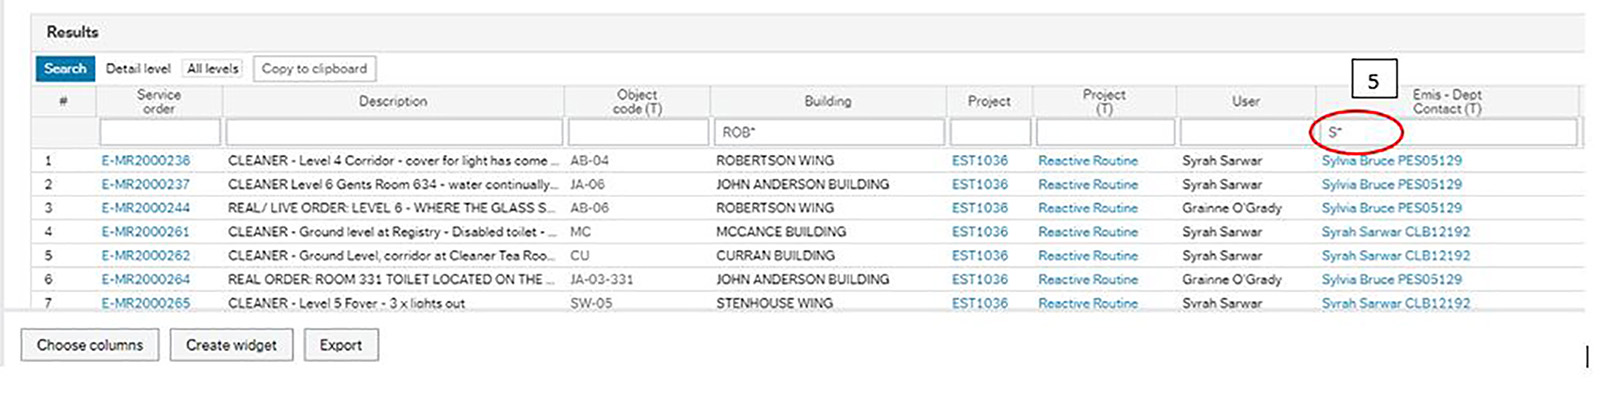 Screenshot of EMS highlighting the Emis - Dept Contact (T) on the far right hand side.